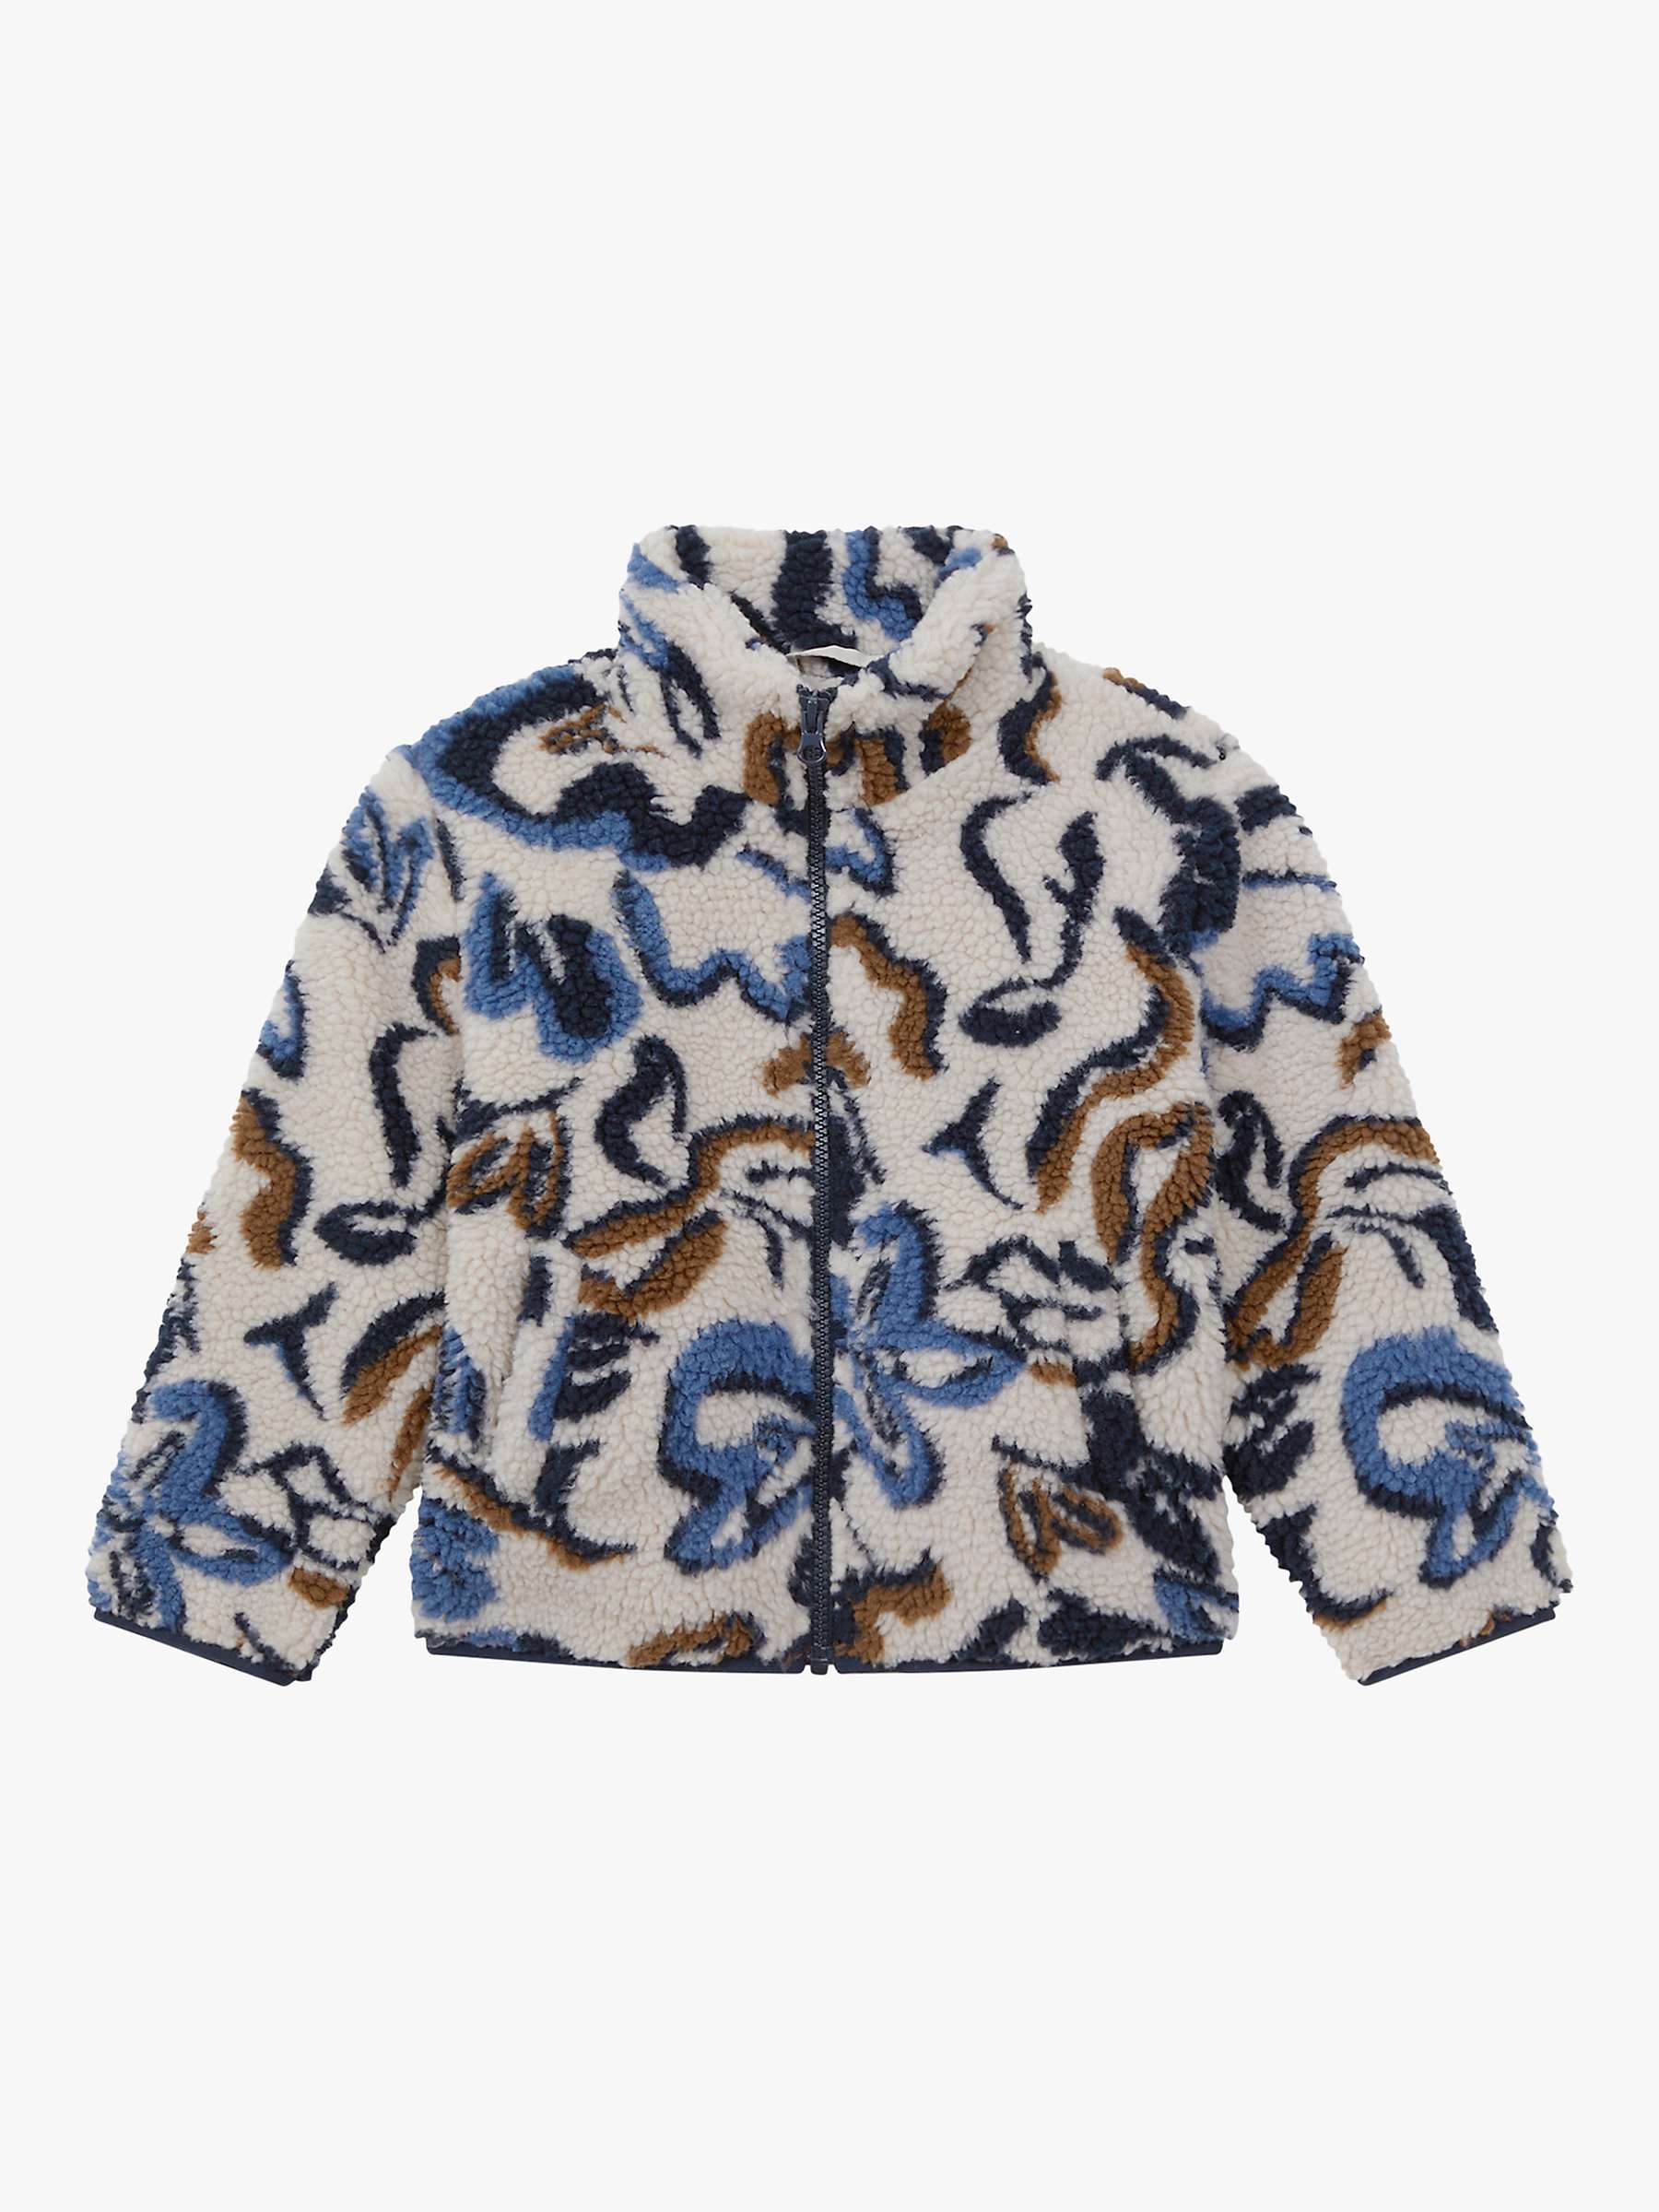 Buy Reiss Kids' Relax Fit Sherpa Abstract Floral Zip Through Jacket, Ecru/Multi Online at johnlewis.com